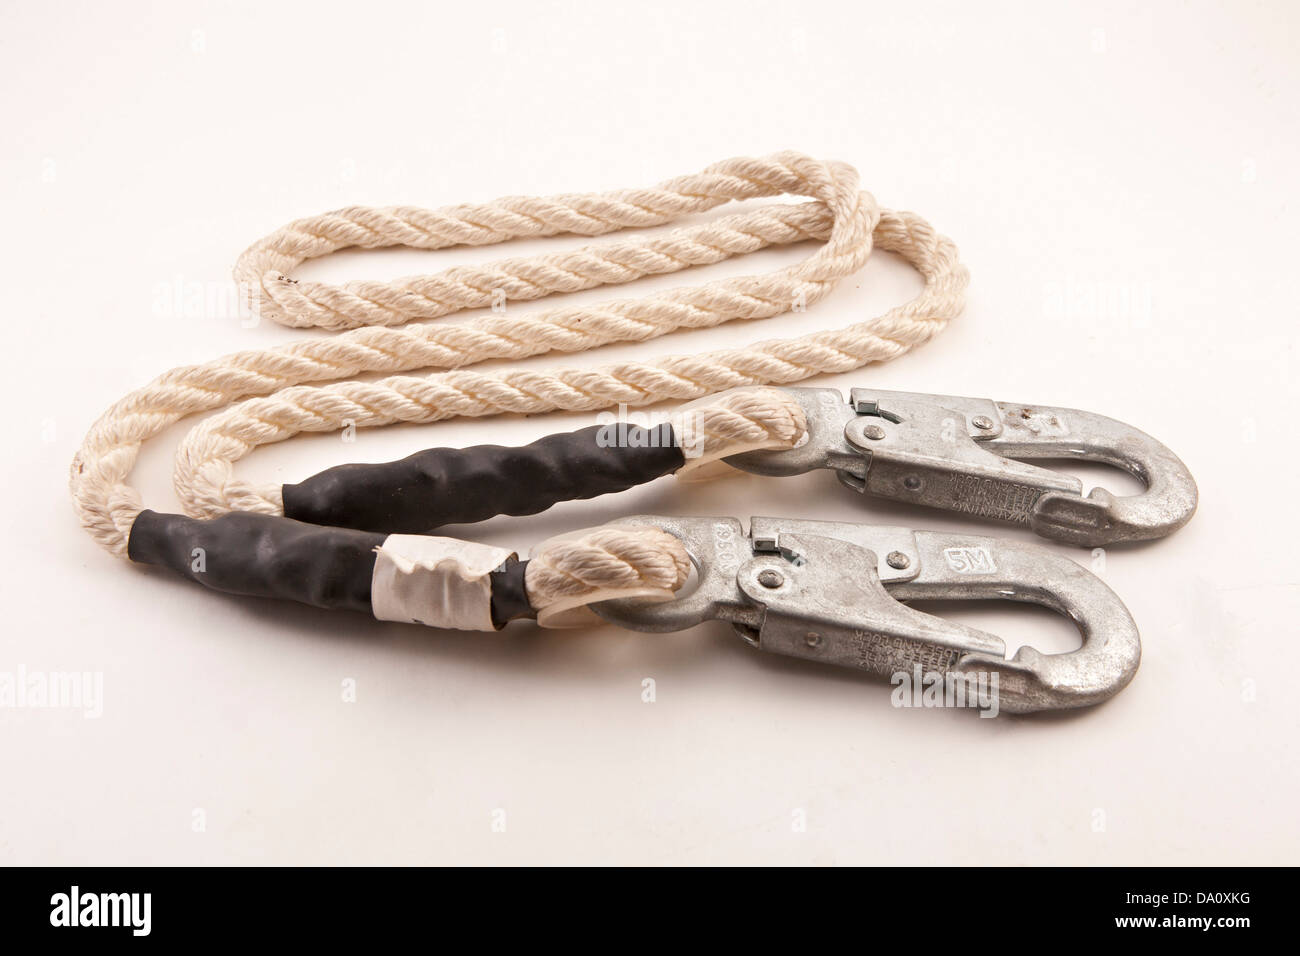 Safety lanyard with locking clips on each end Stock Photo